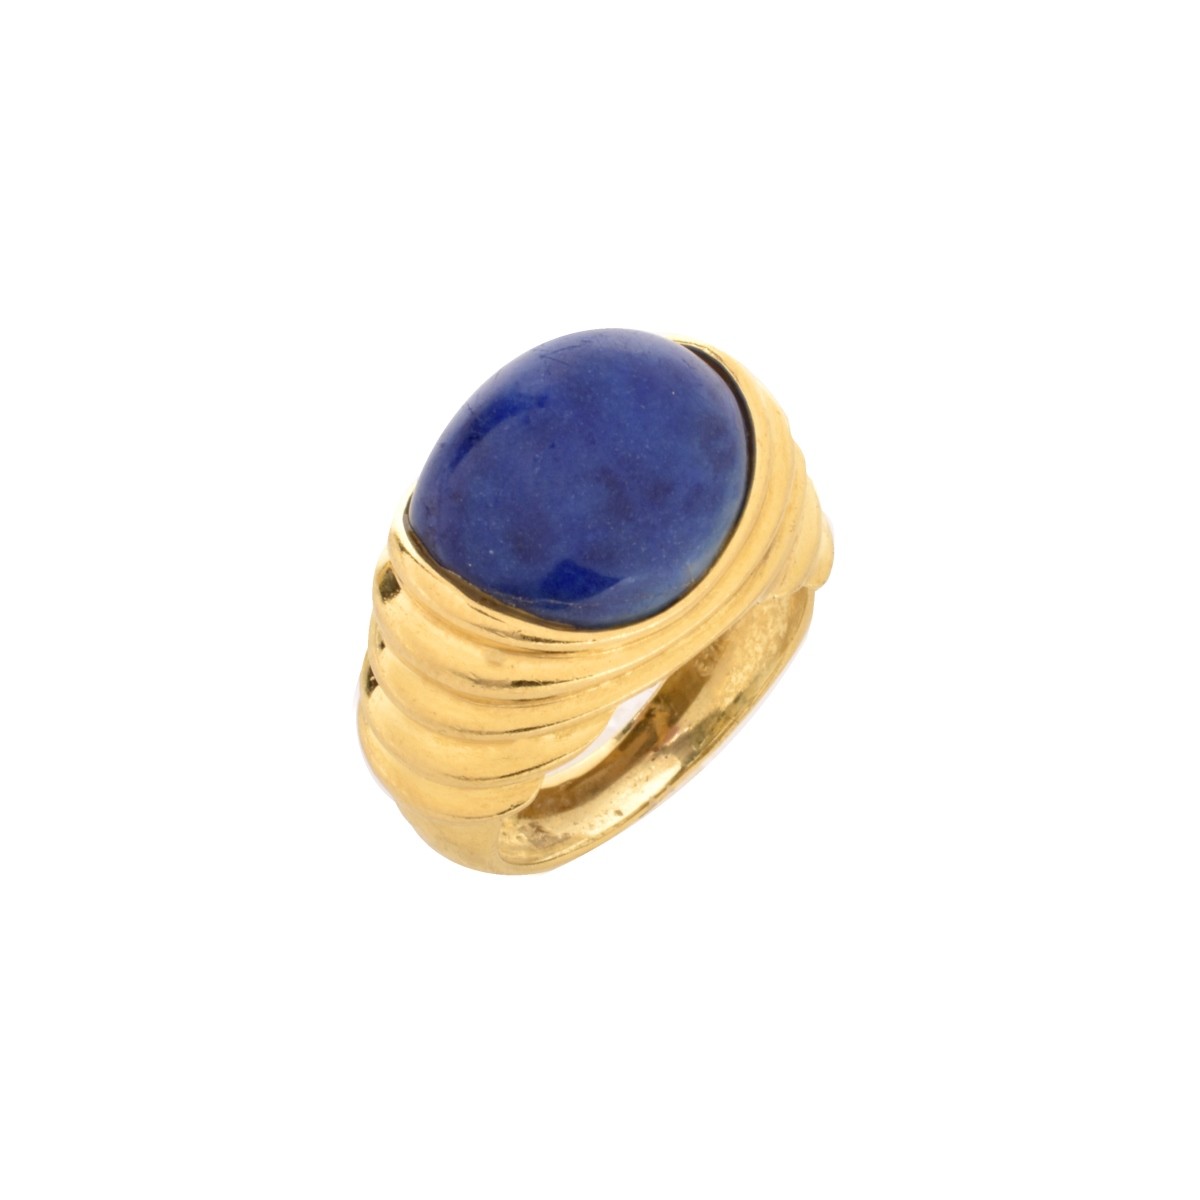 Lapis and 18K Ring and Earrings